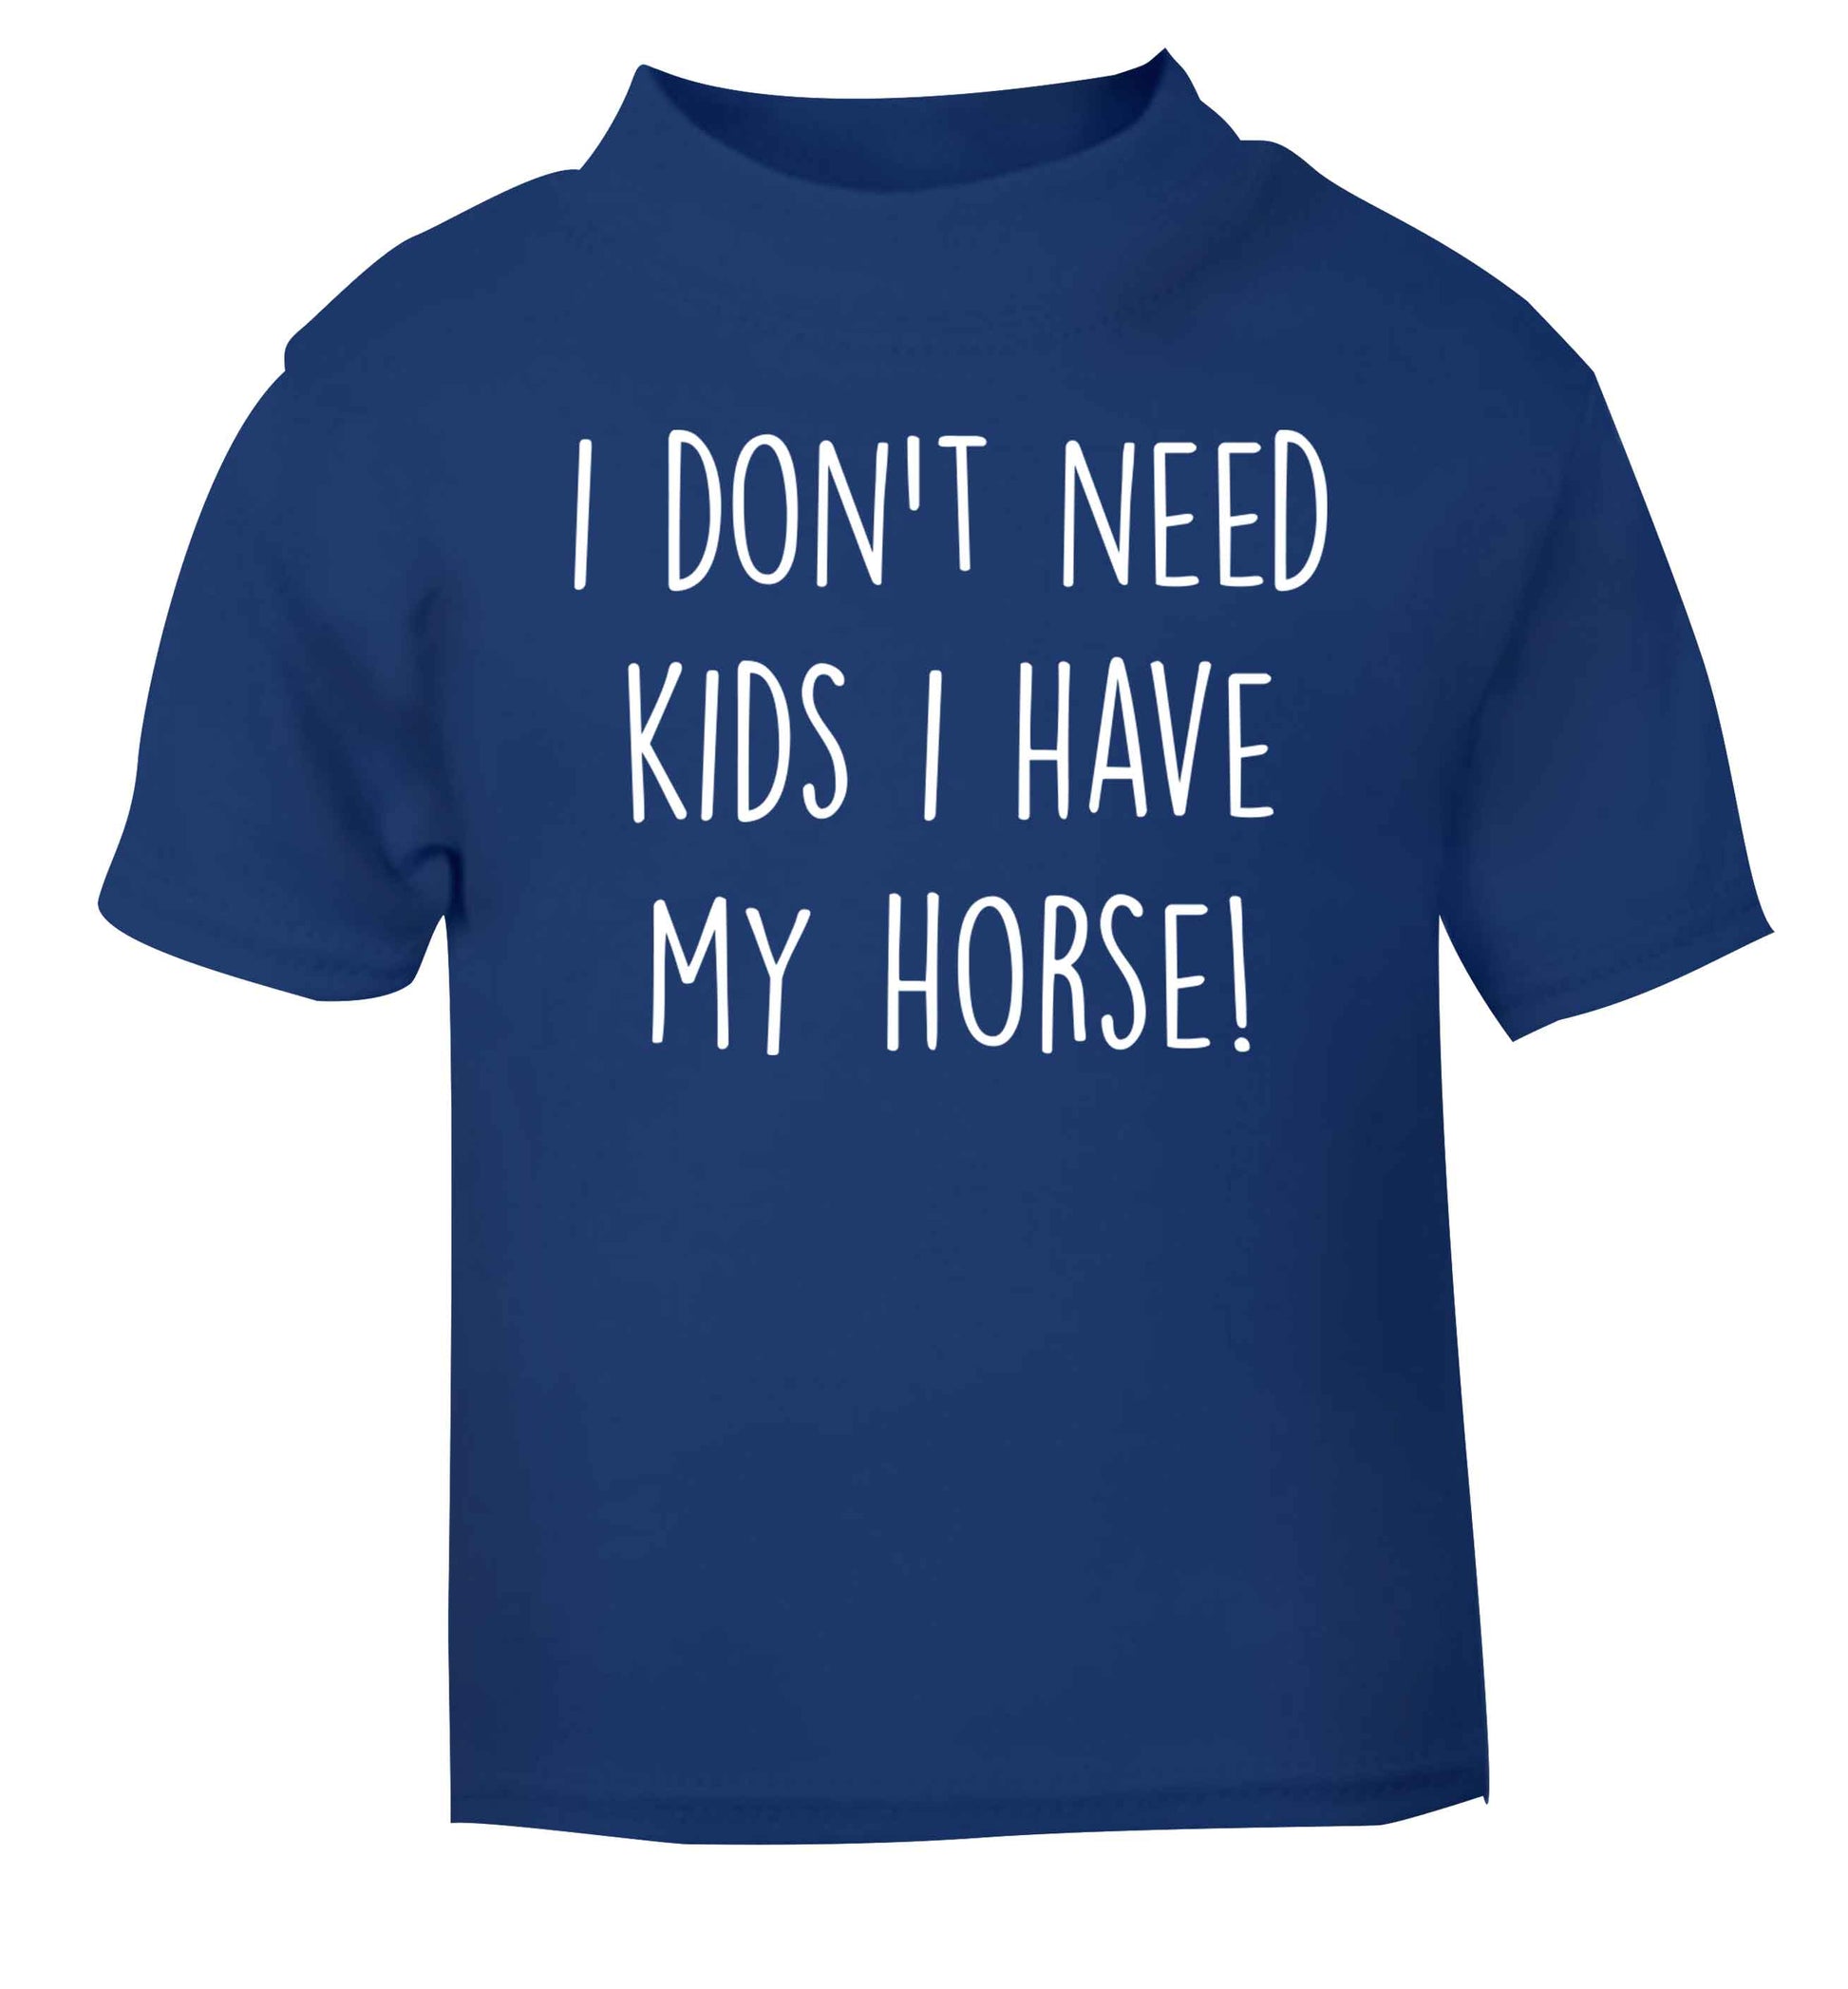 I don't need kids I have my horse blue baby toddler Tshirt 2 Years